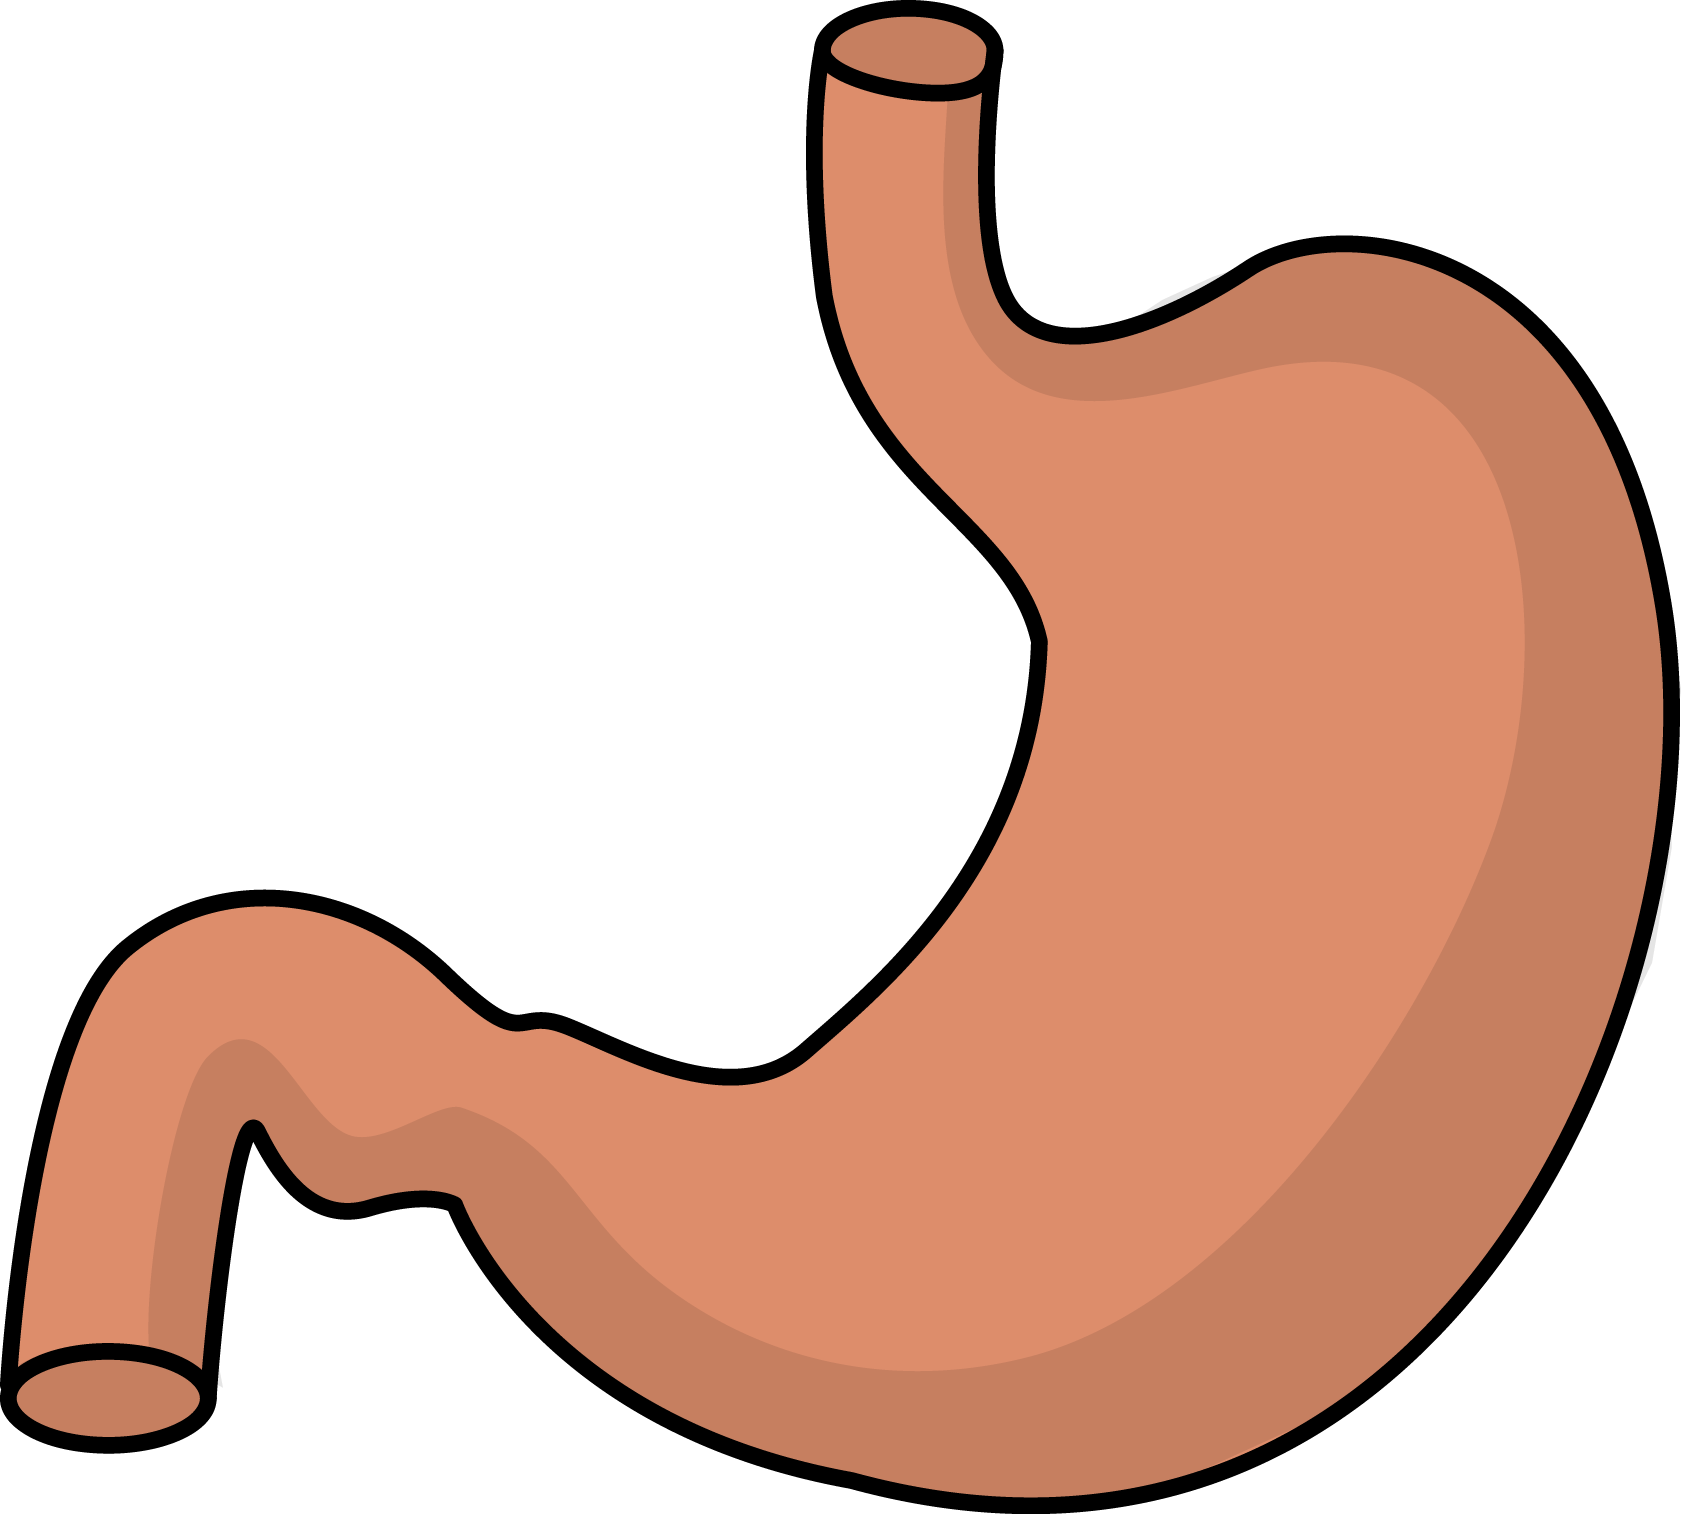 File:201405 stomach.png